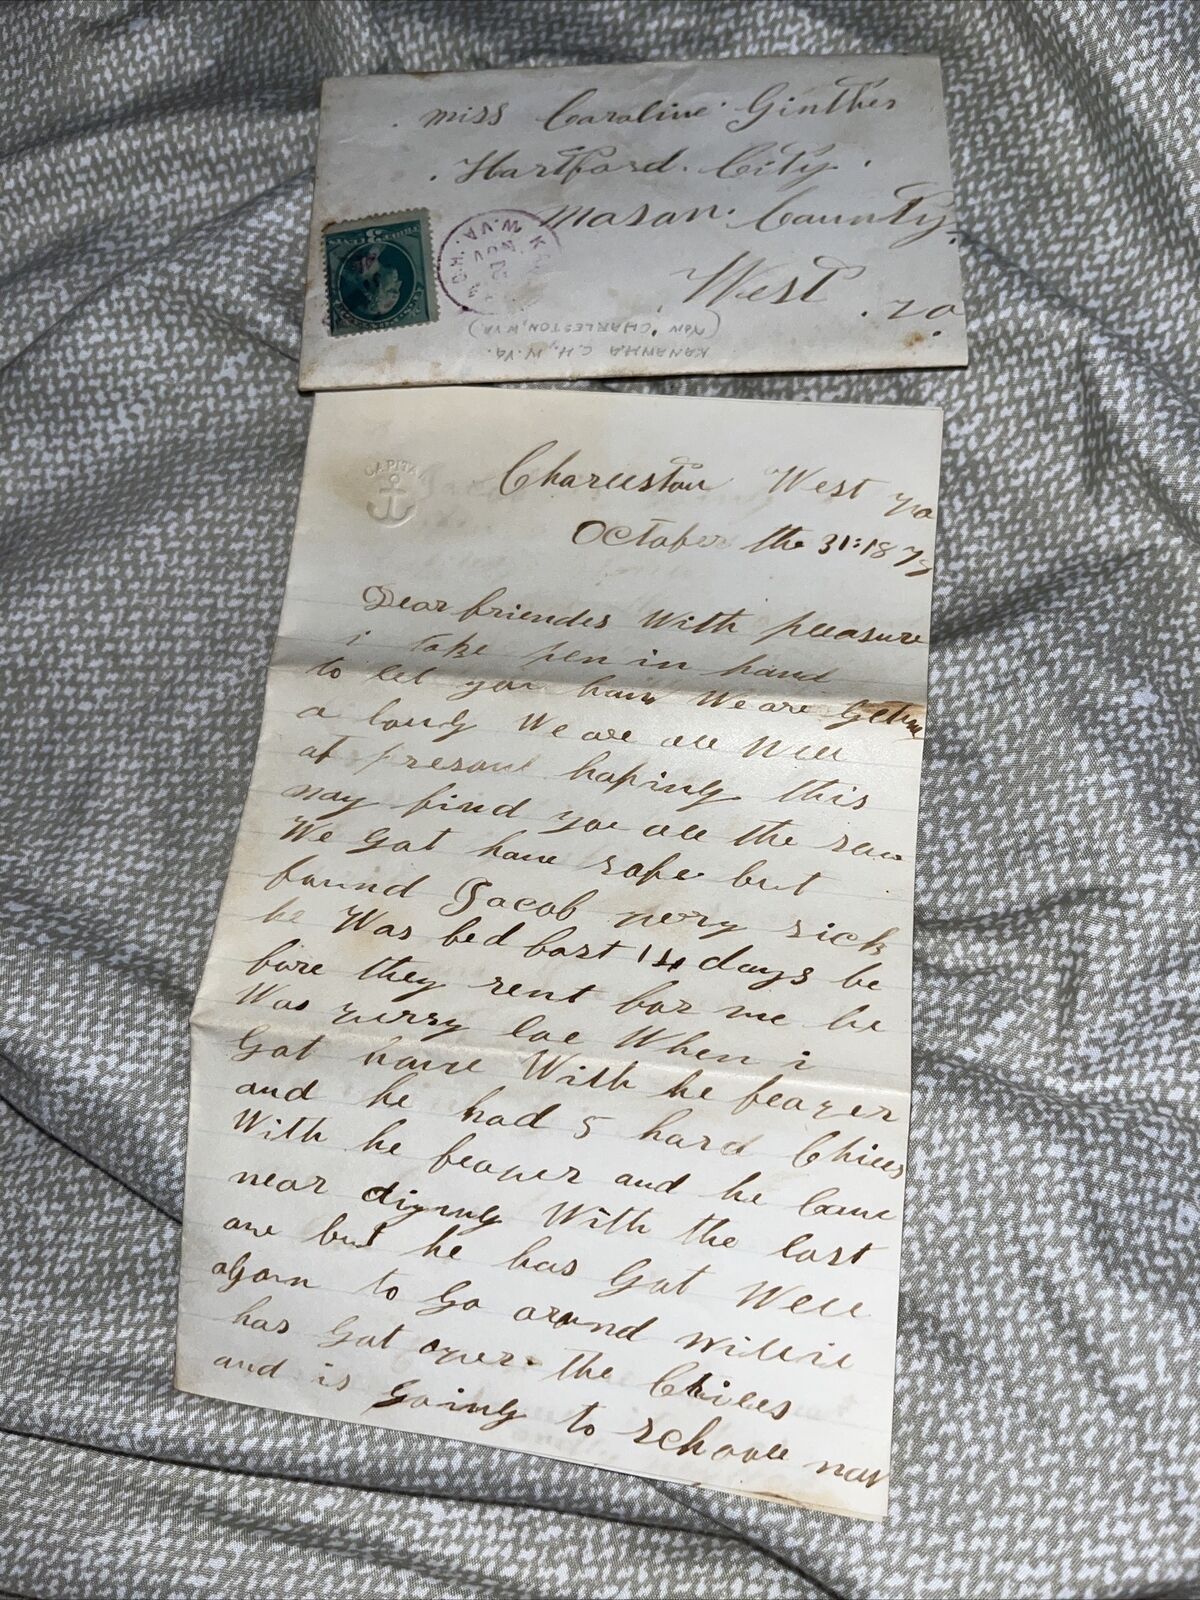 Antique 1877 Letter from Charleston West Virginia: Railroad Coming w/ good times